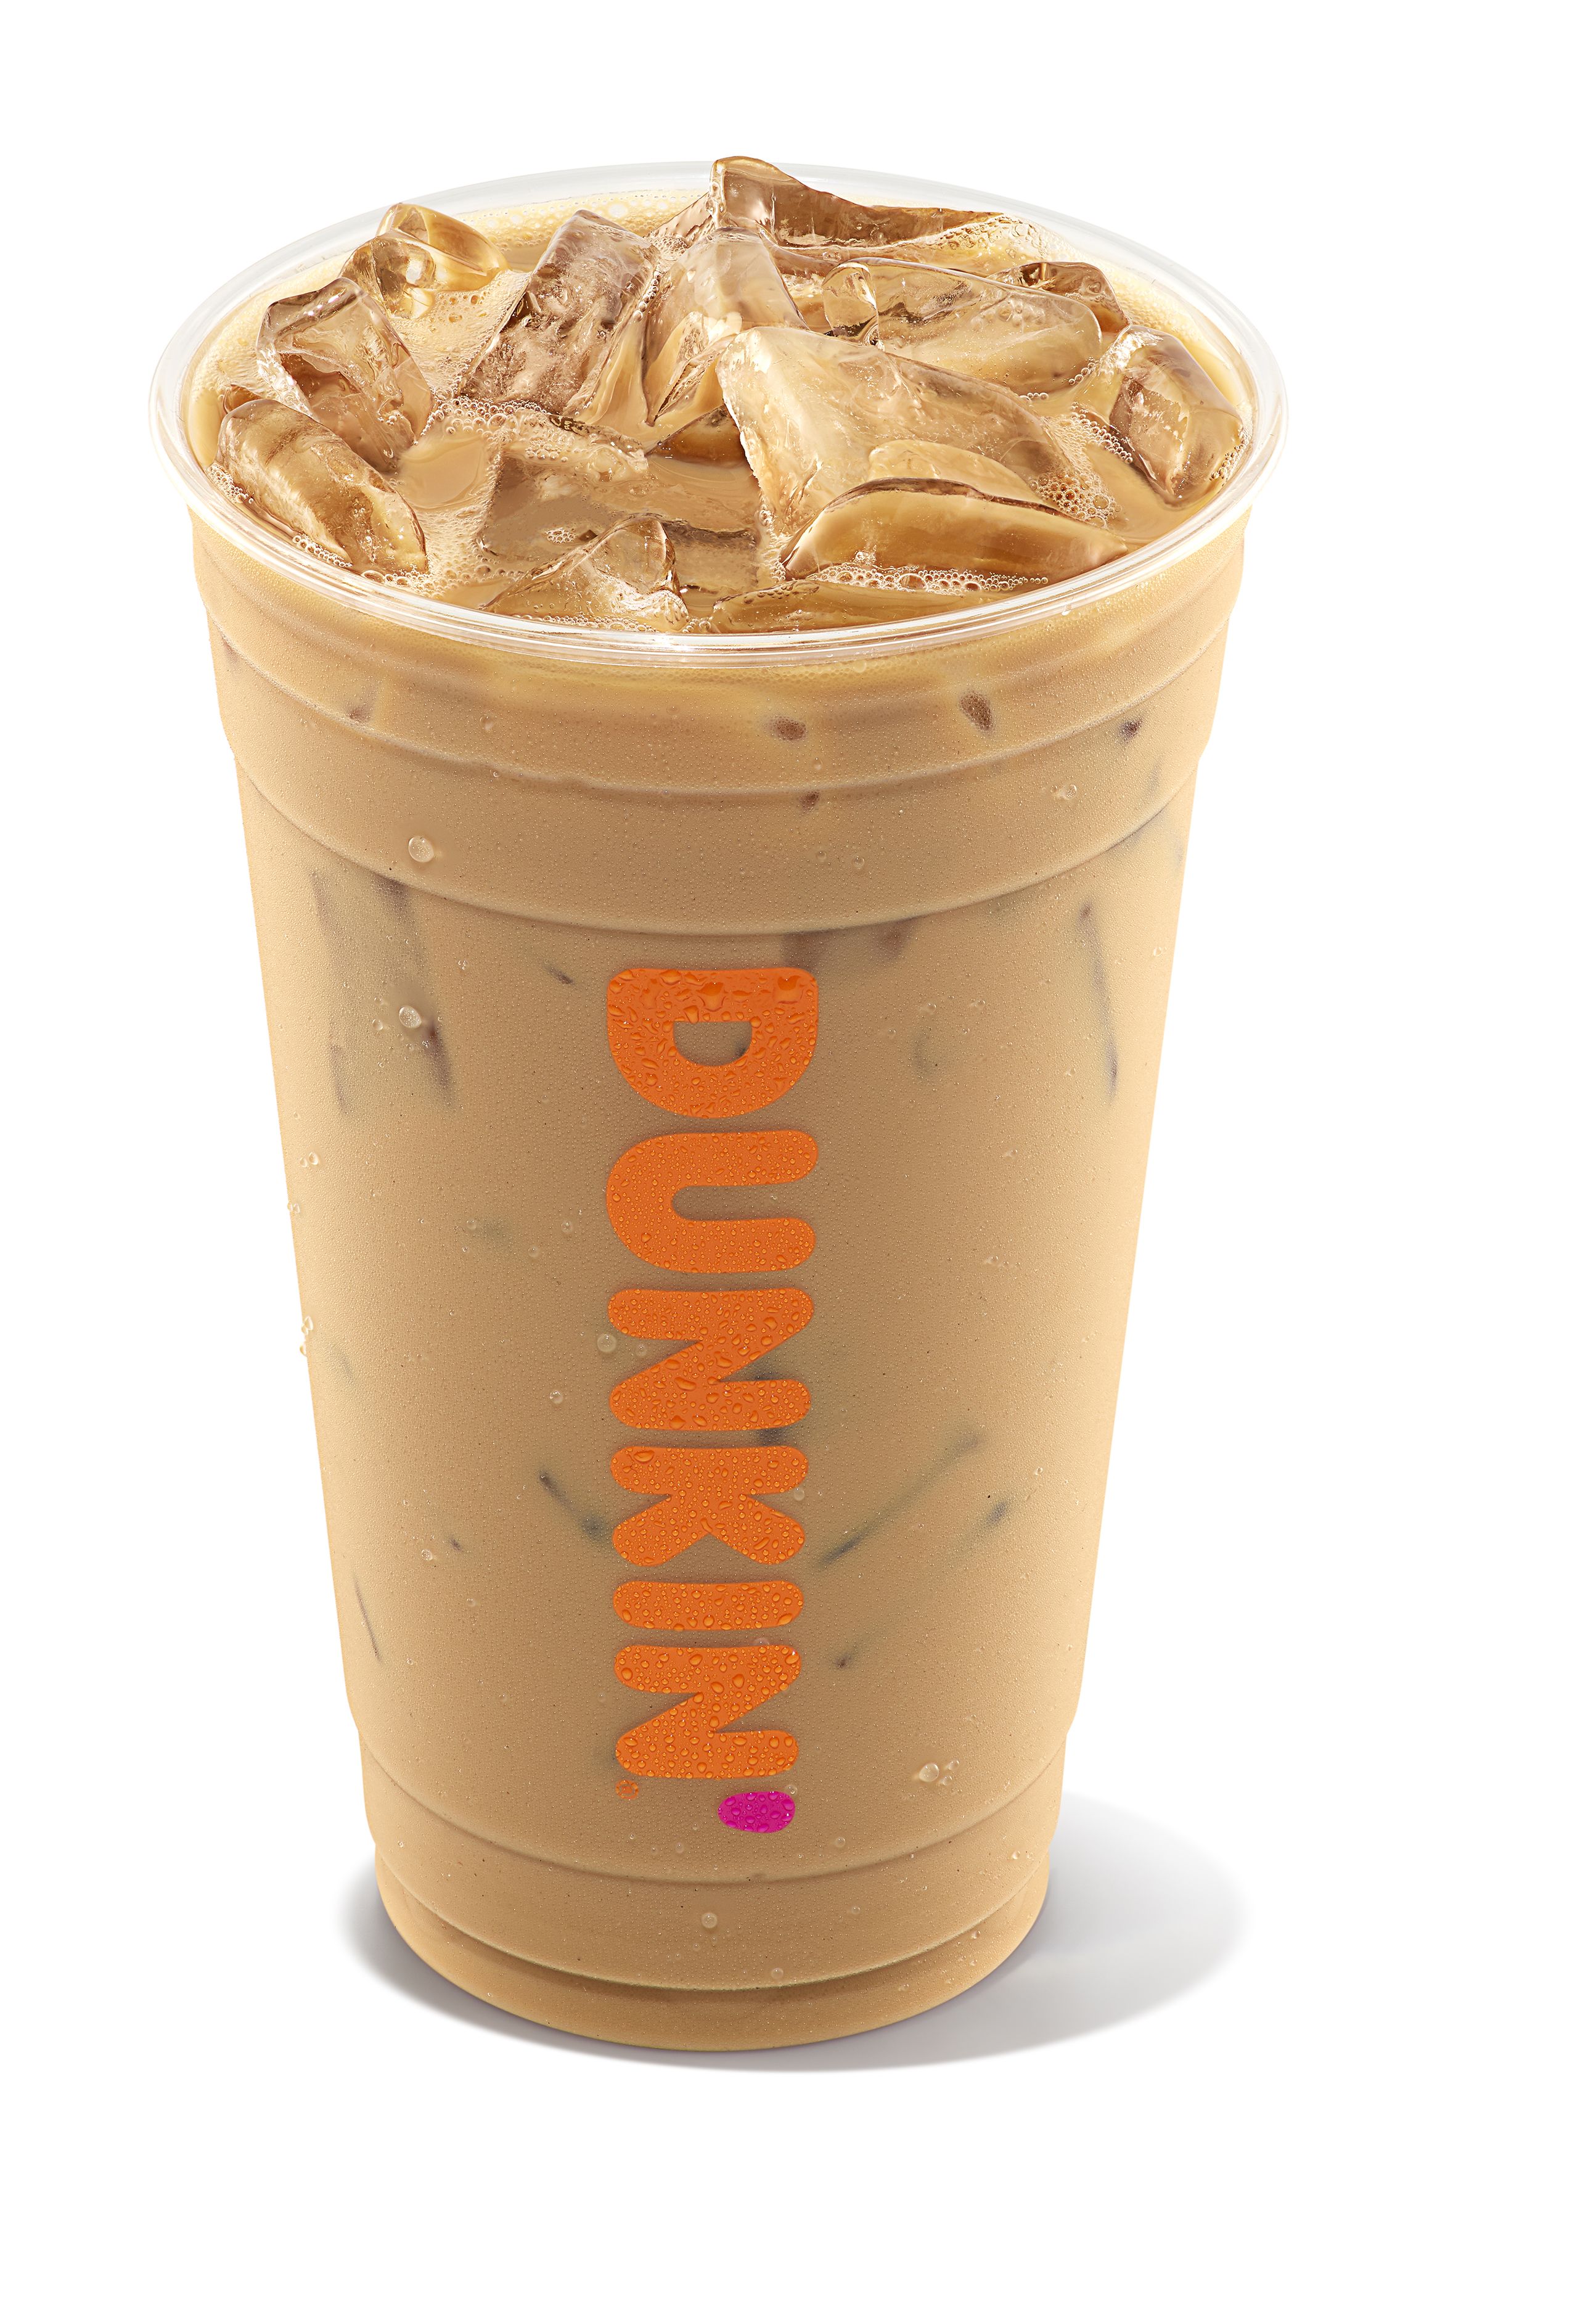 Dunkin Iced Coffee Flavors Menu A Mostly Objective Review Of Every